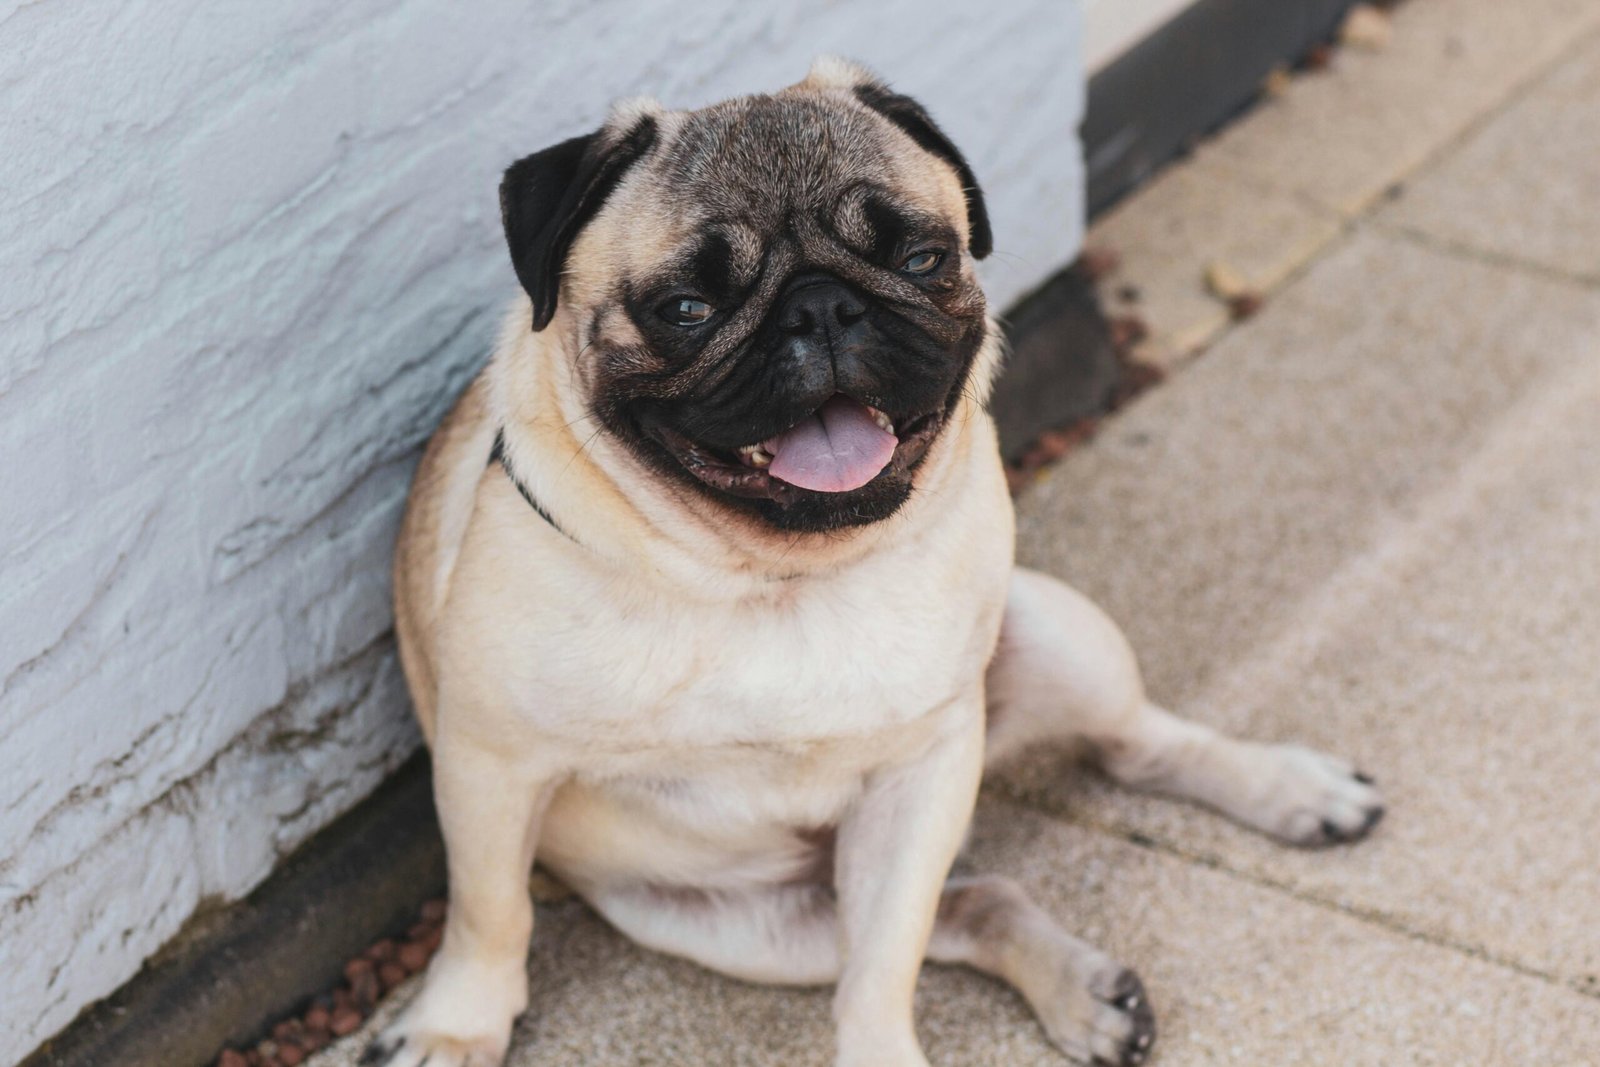 The Ultimate Guide to Ethically Buying or Adopting a Pug